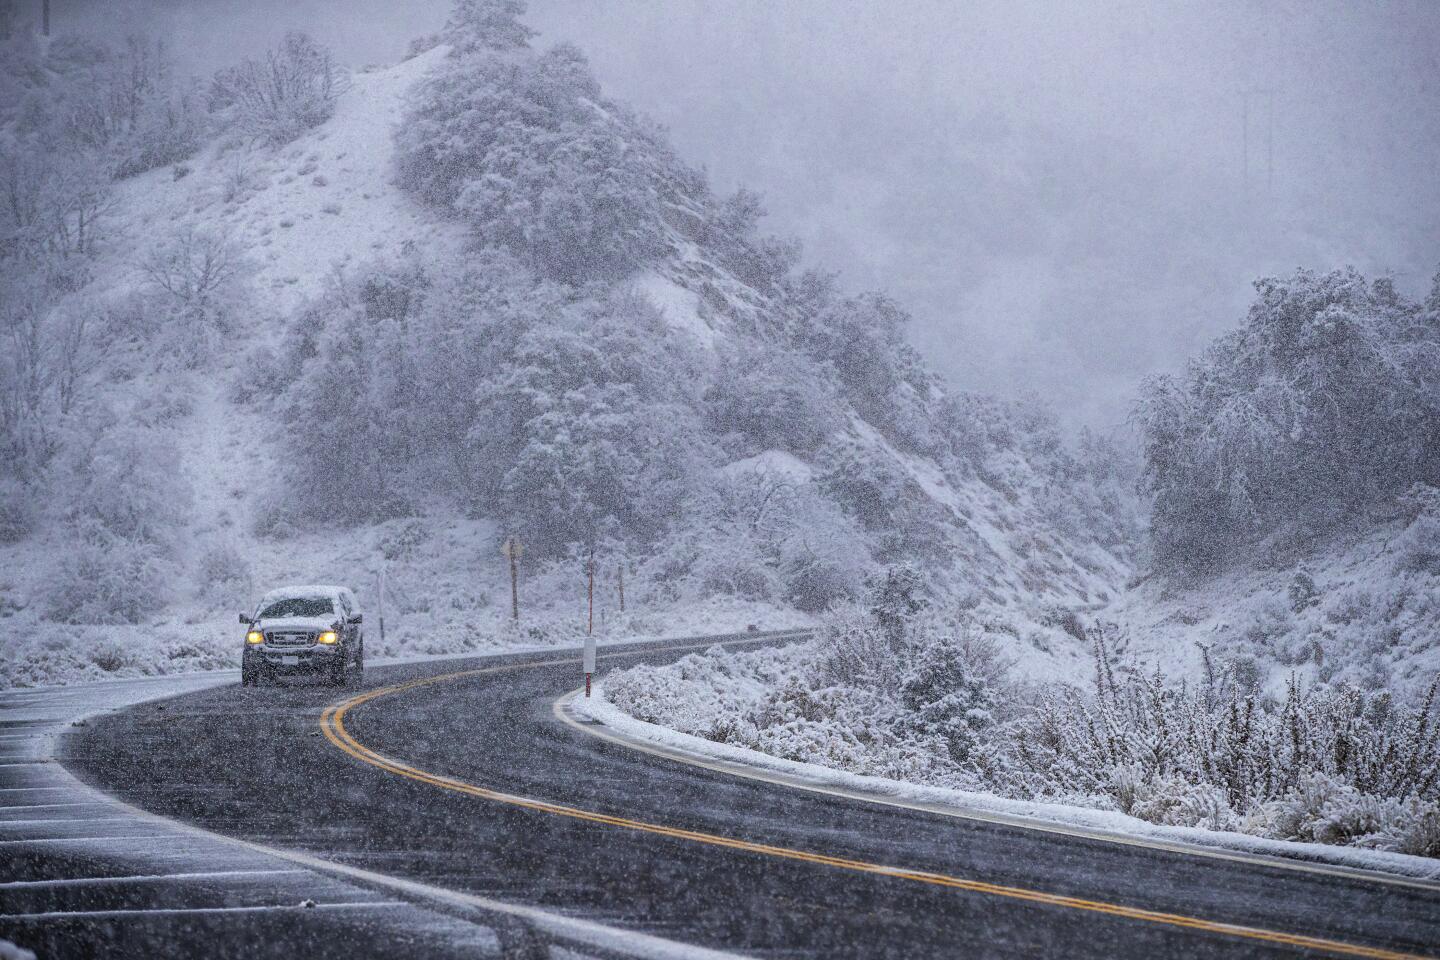 Snow blankets high-desert plant life and terrain along Highway 2 as the first snowfall of the season arrives in Wrightwood, California.